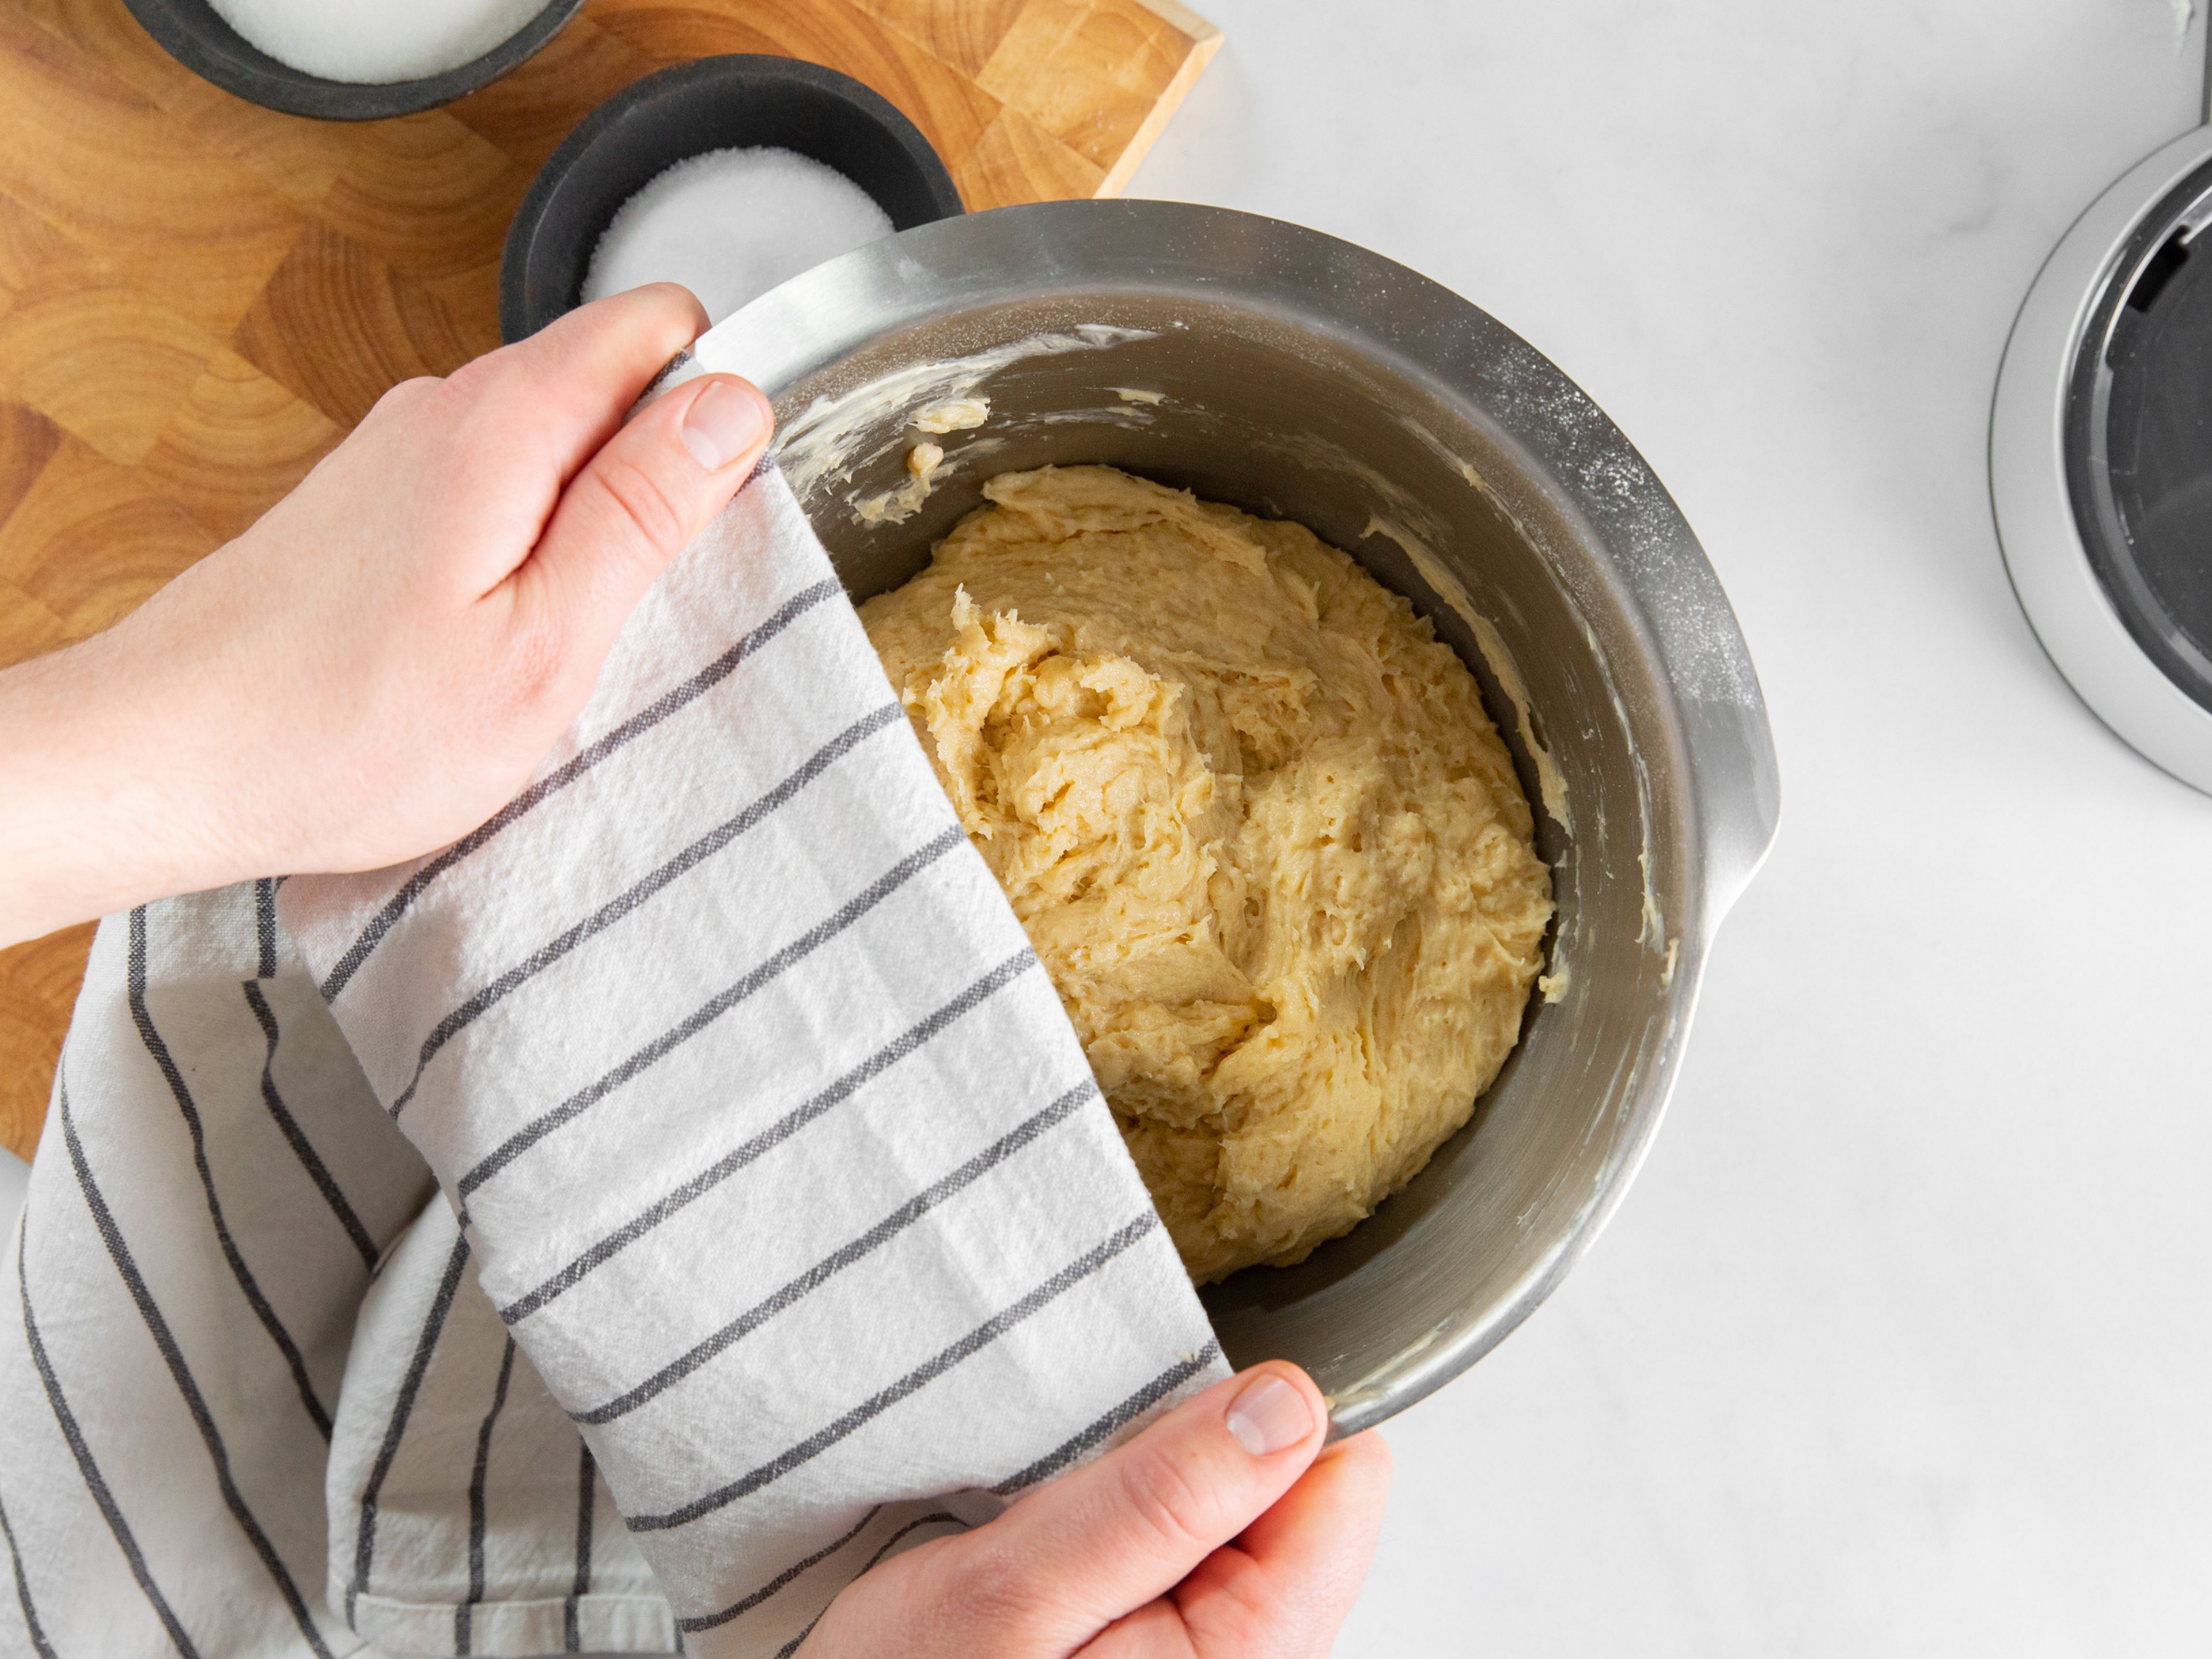 Cover the bowl with a clean kitchen towel and leave to rise for approx. 2 hr., or until doubled in size.